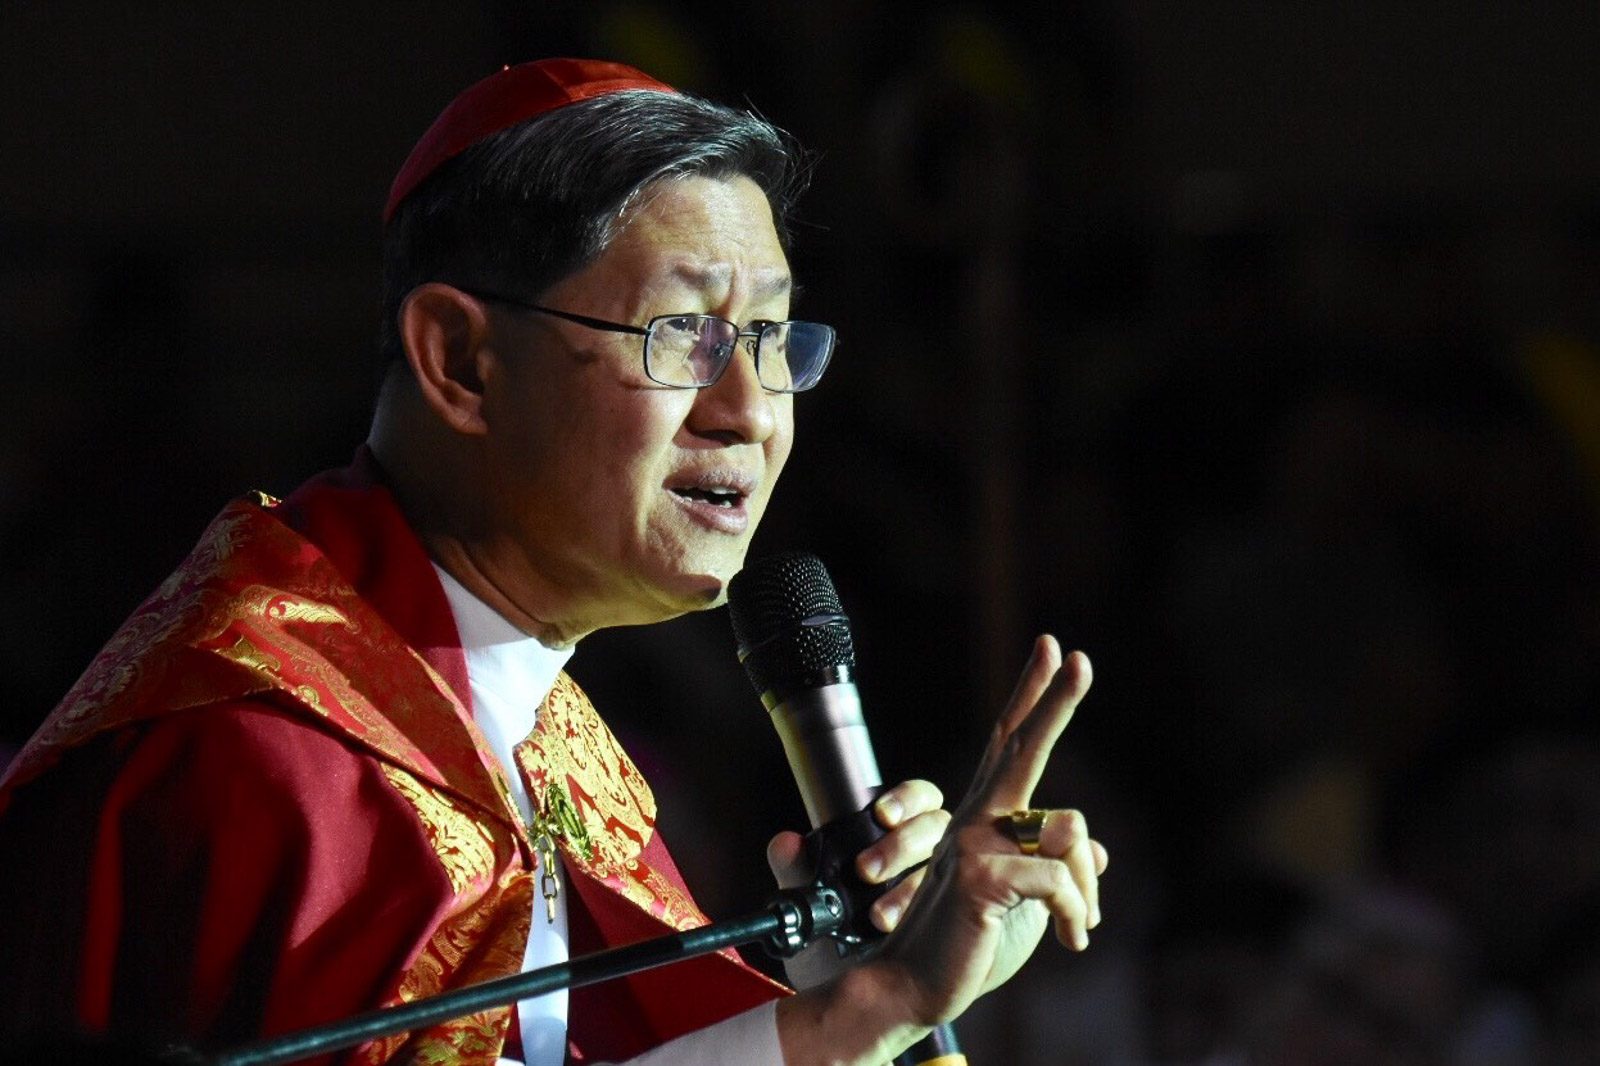 Cardinal Tagle prays for peace in Middle East during Traslacion 2020 mass